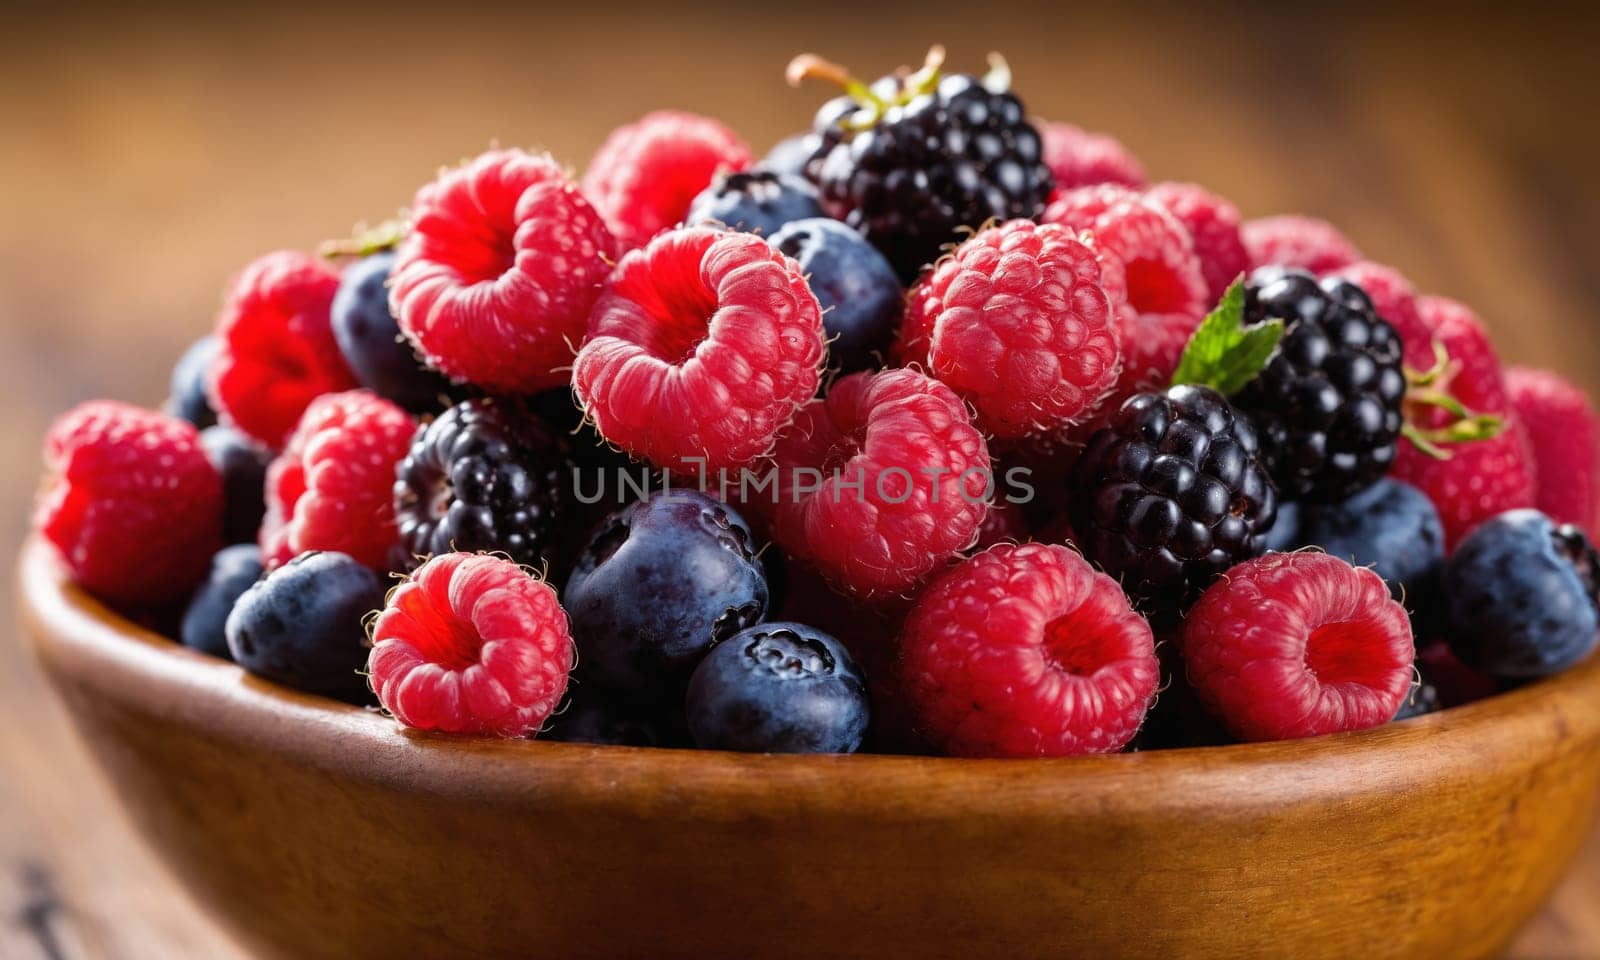 Wooden bowl with raspberries, blueberries, and blackberries on table by Andre1ns